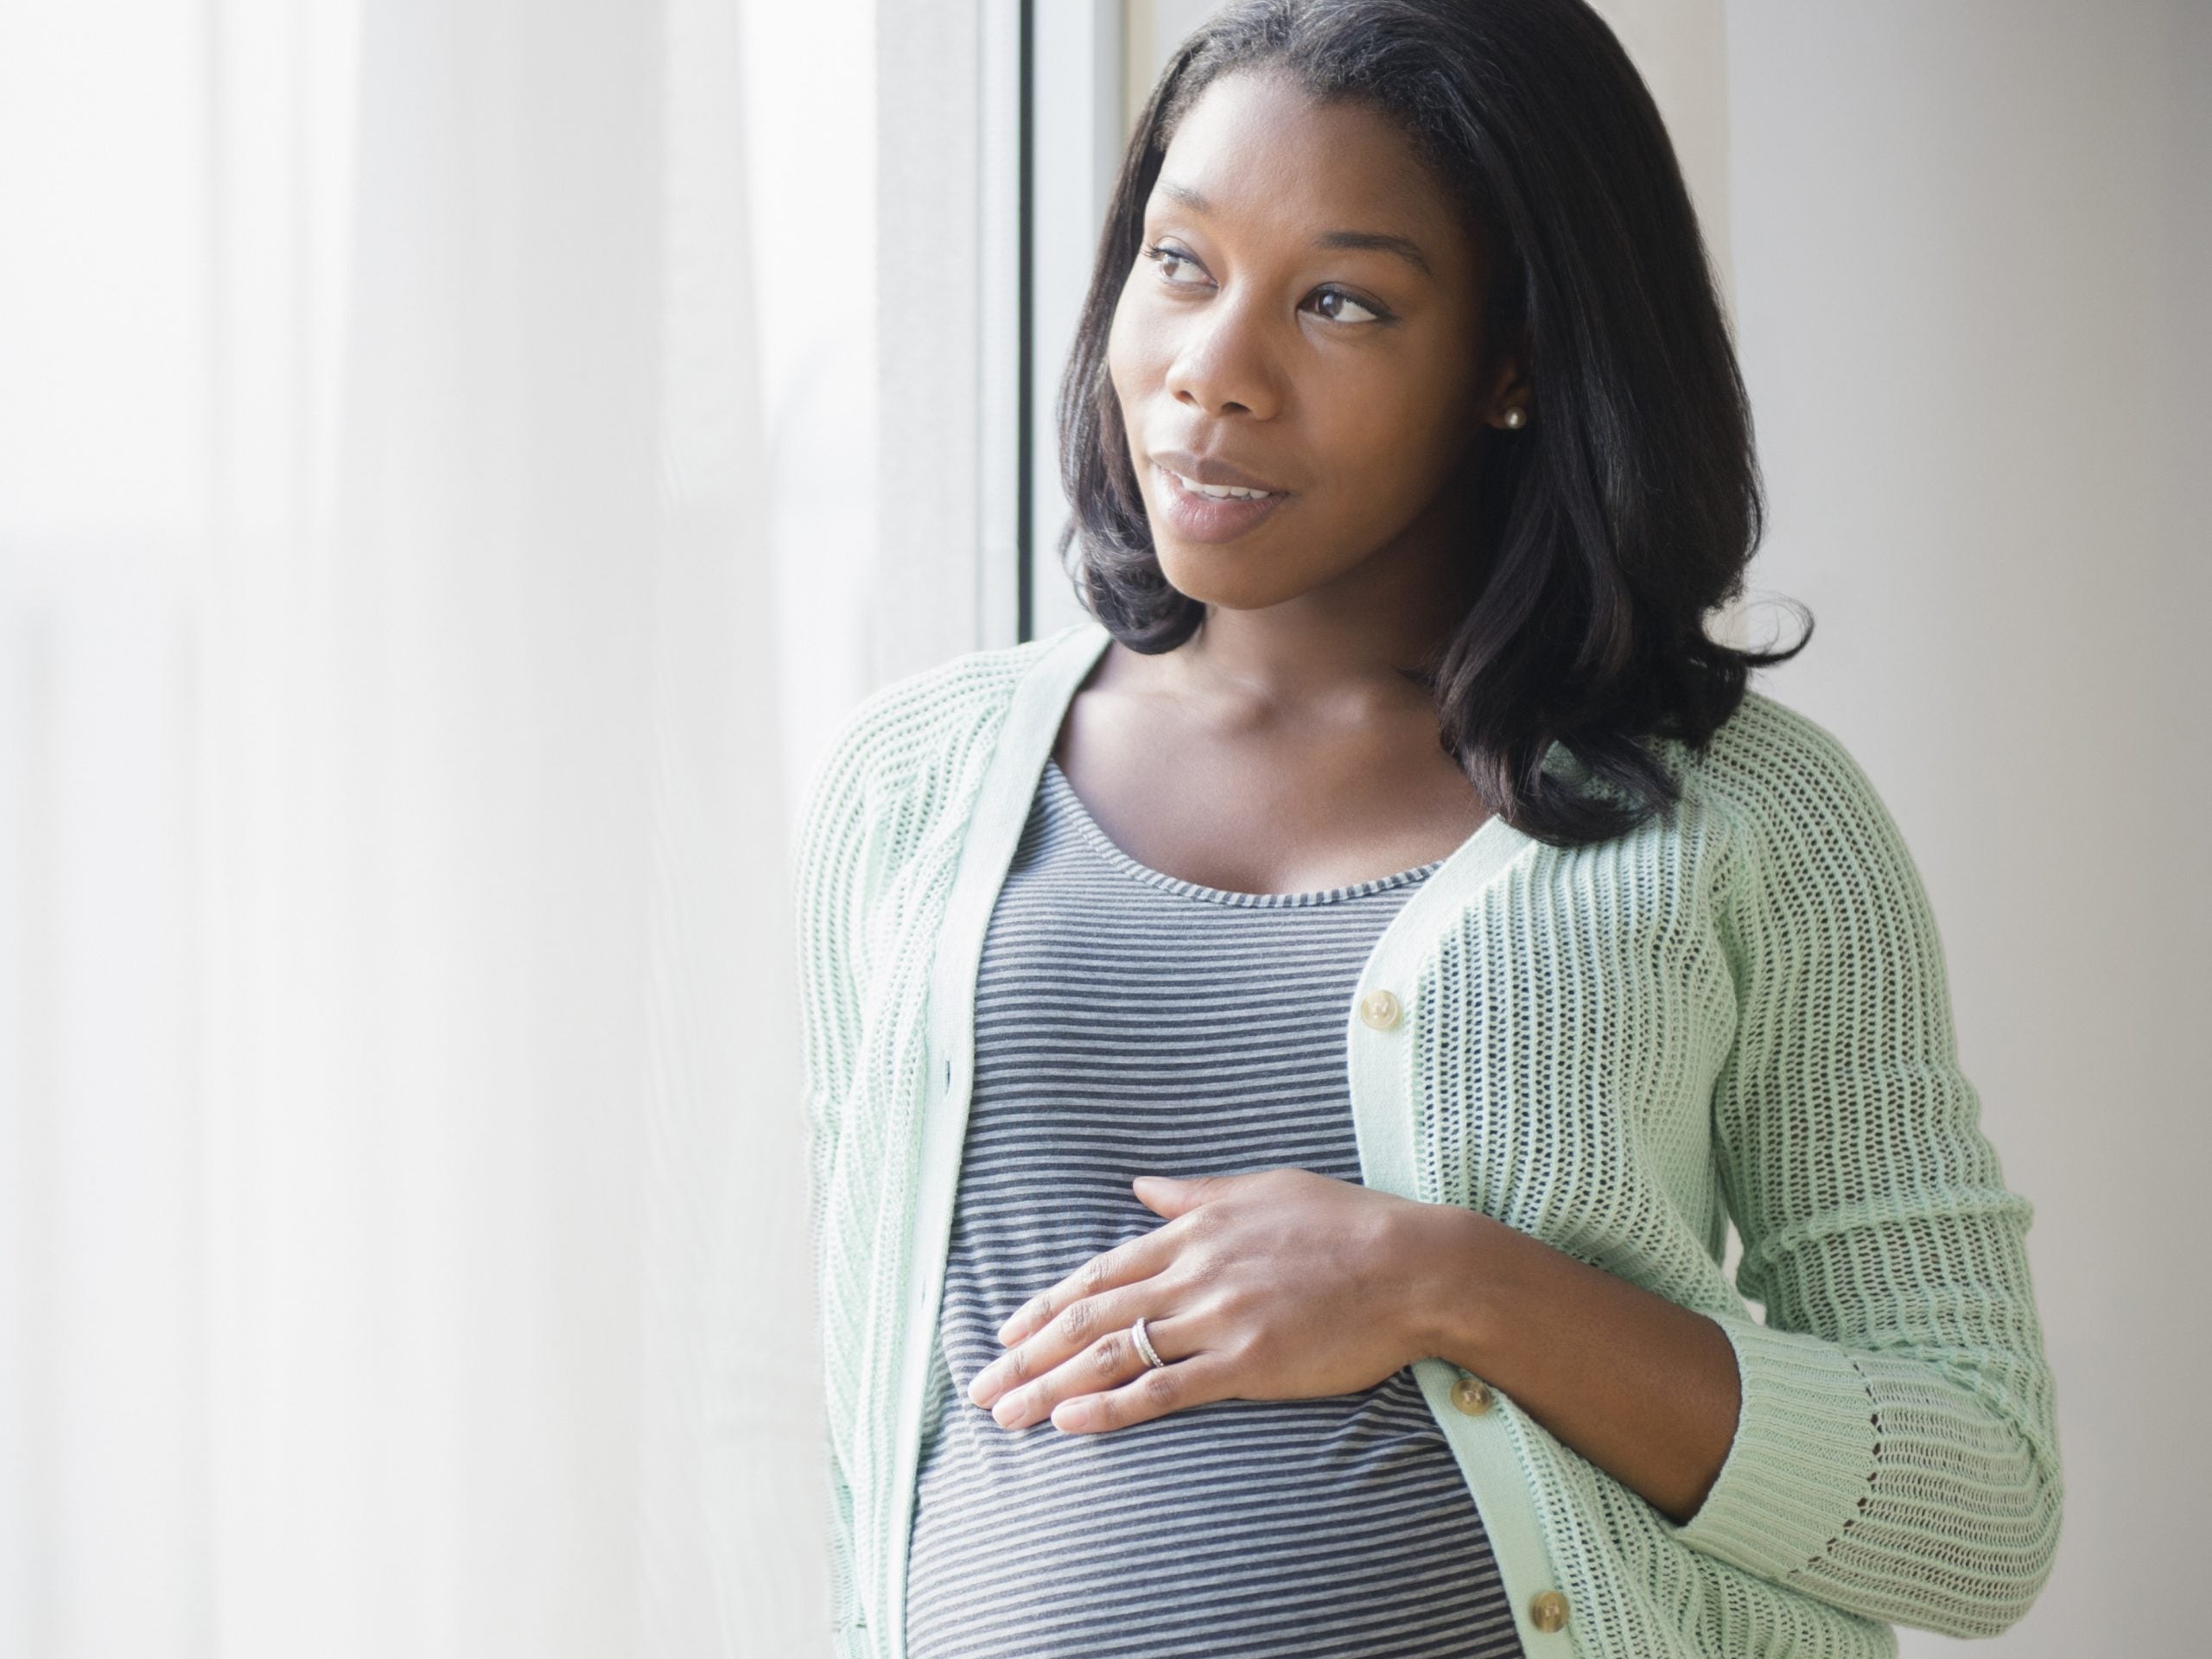 OP-ED: Maternal And Mental Health Are Interconnected